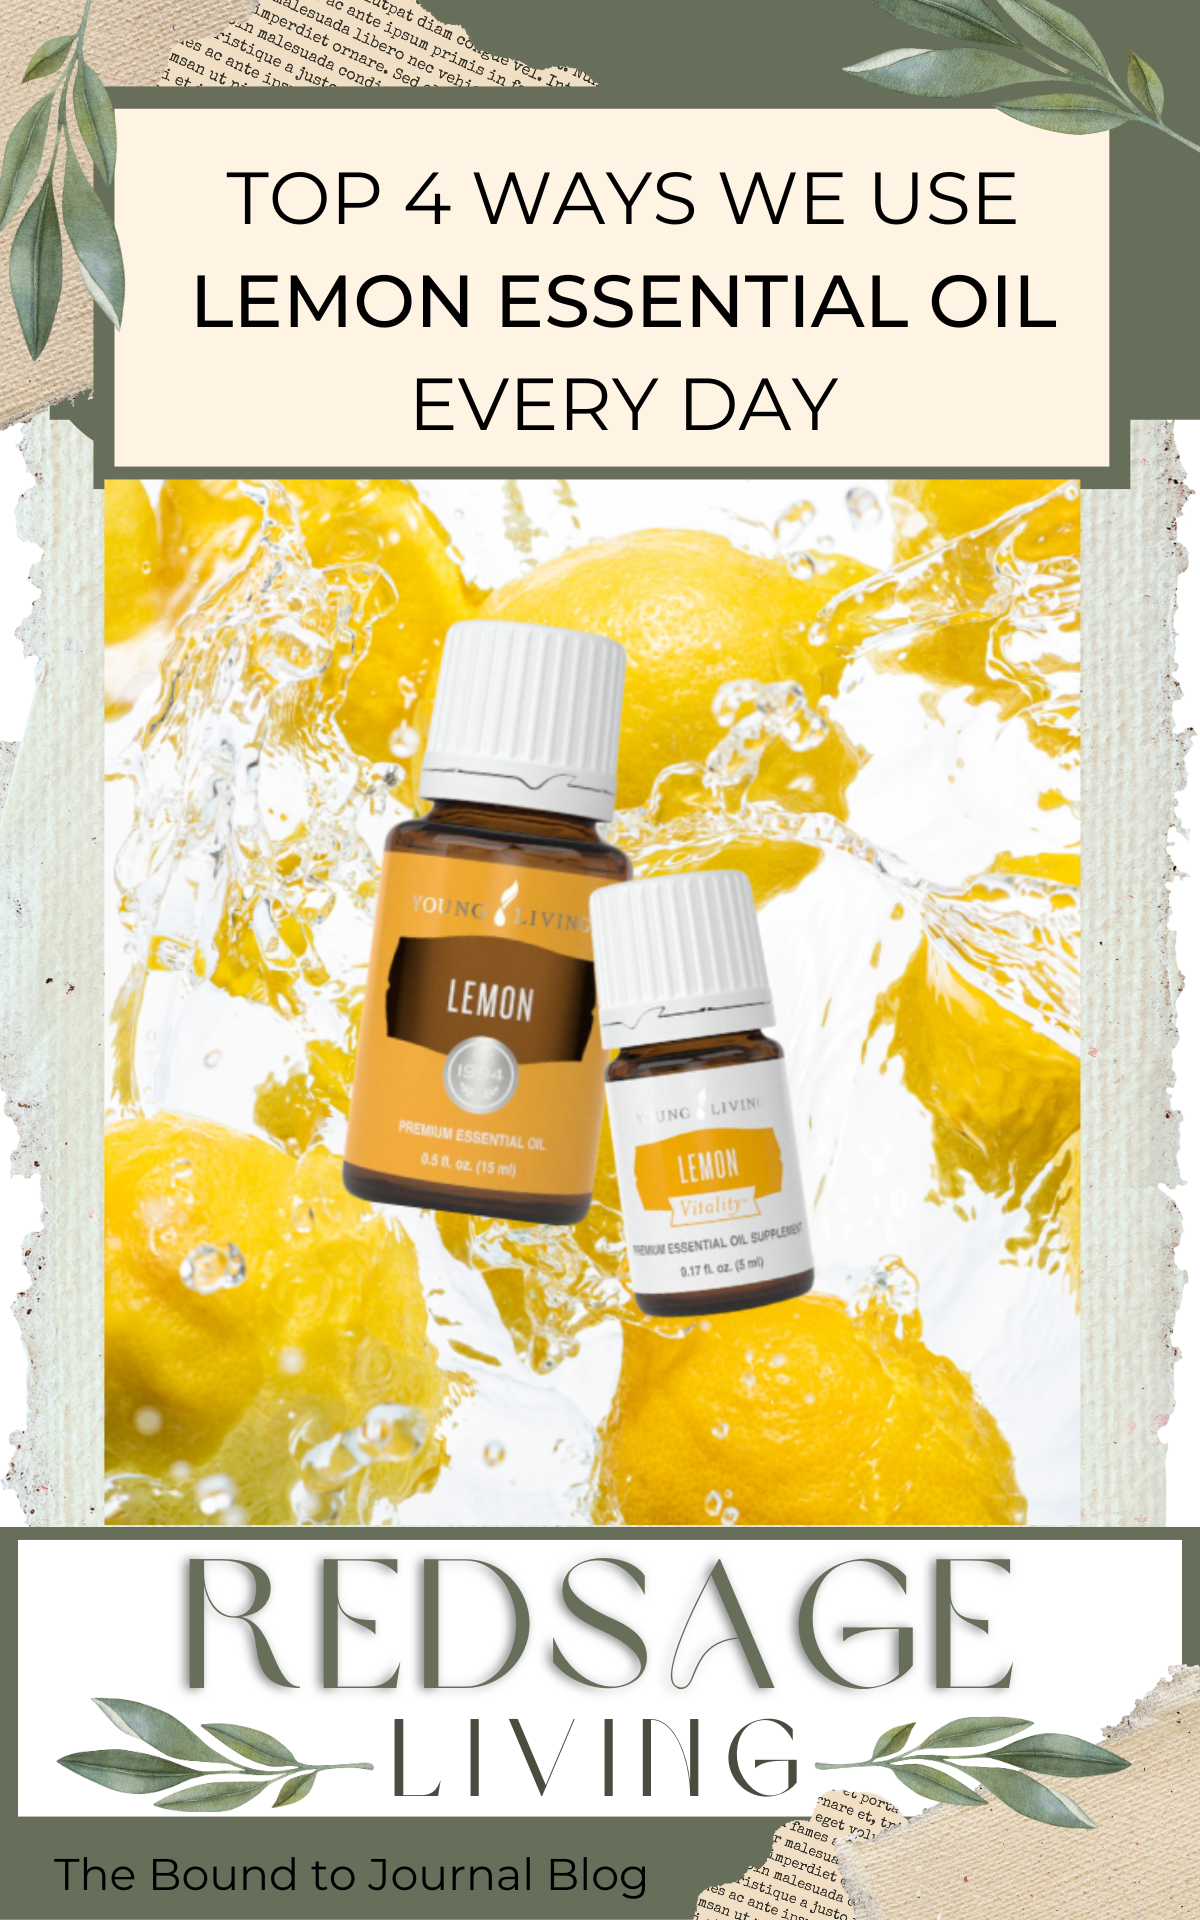 Image with lemons and lemon oil bottles Top 4 Ways we use lemon essential oil every day vertical image